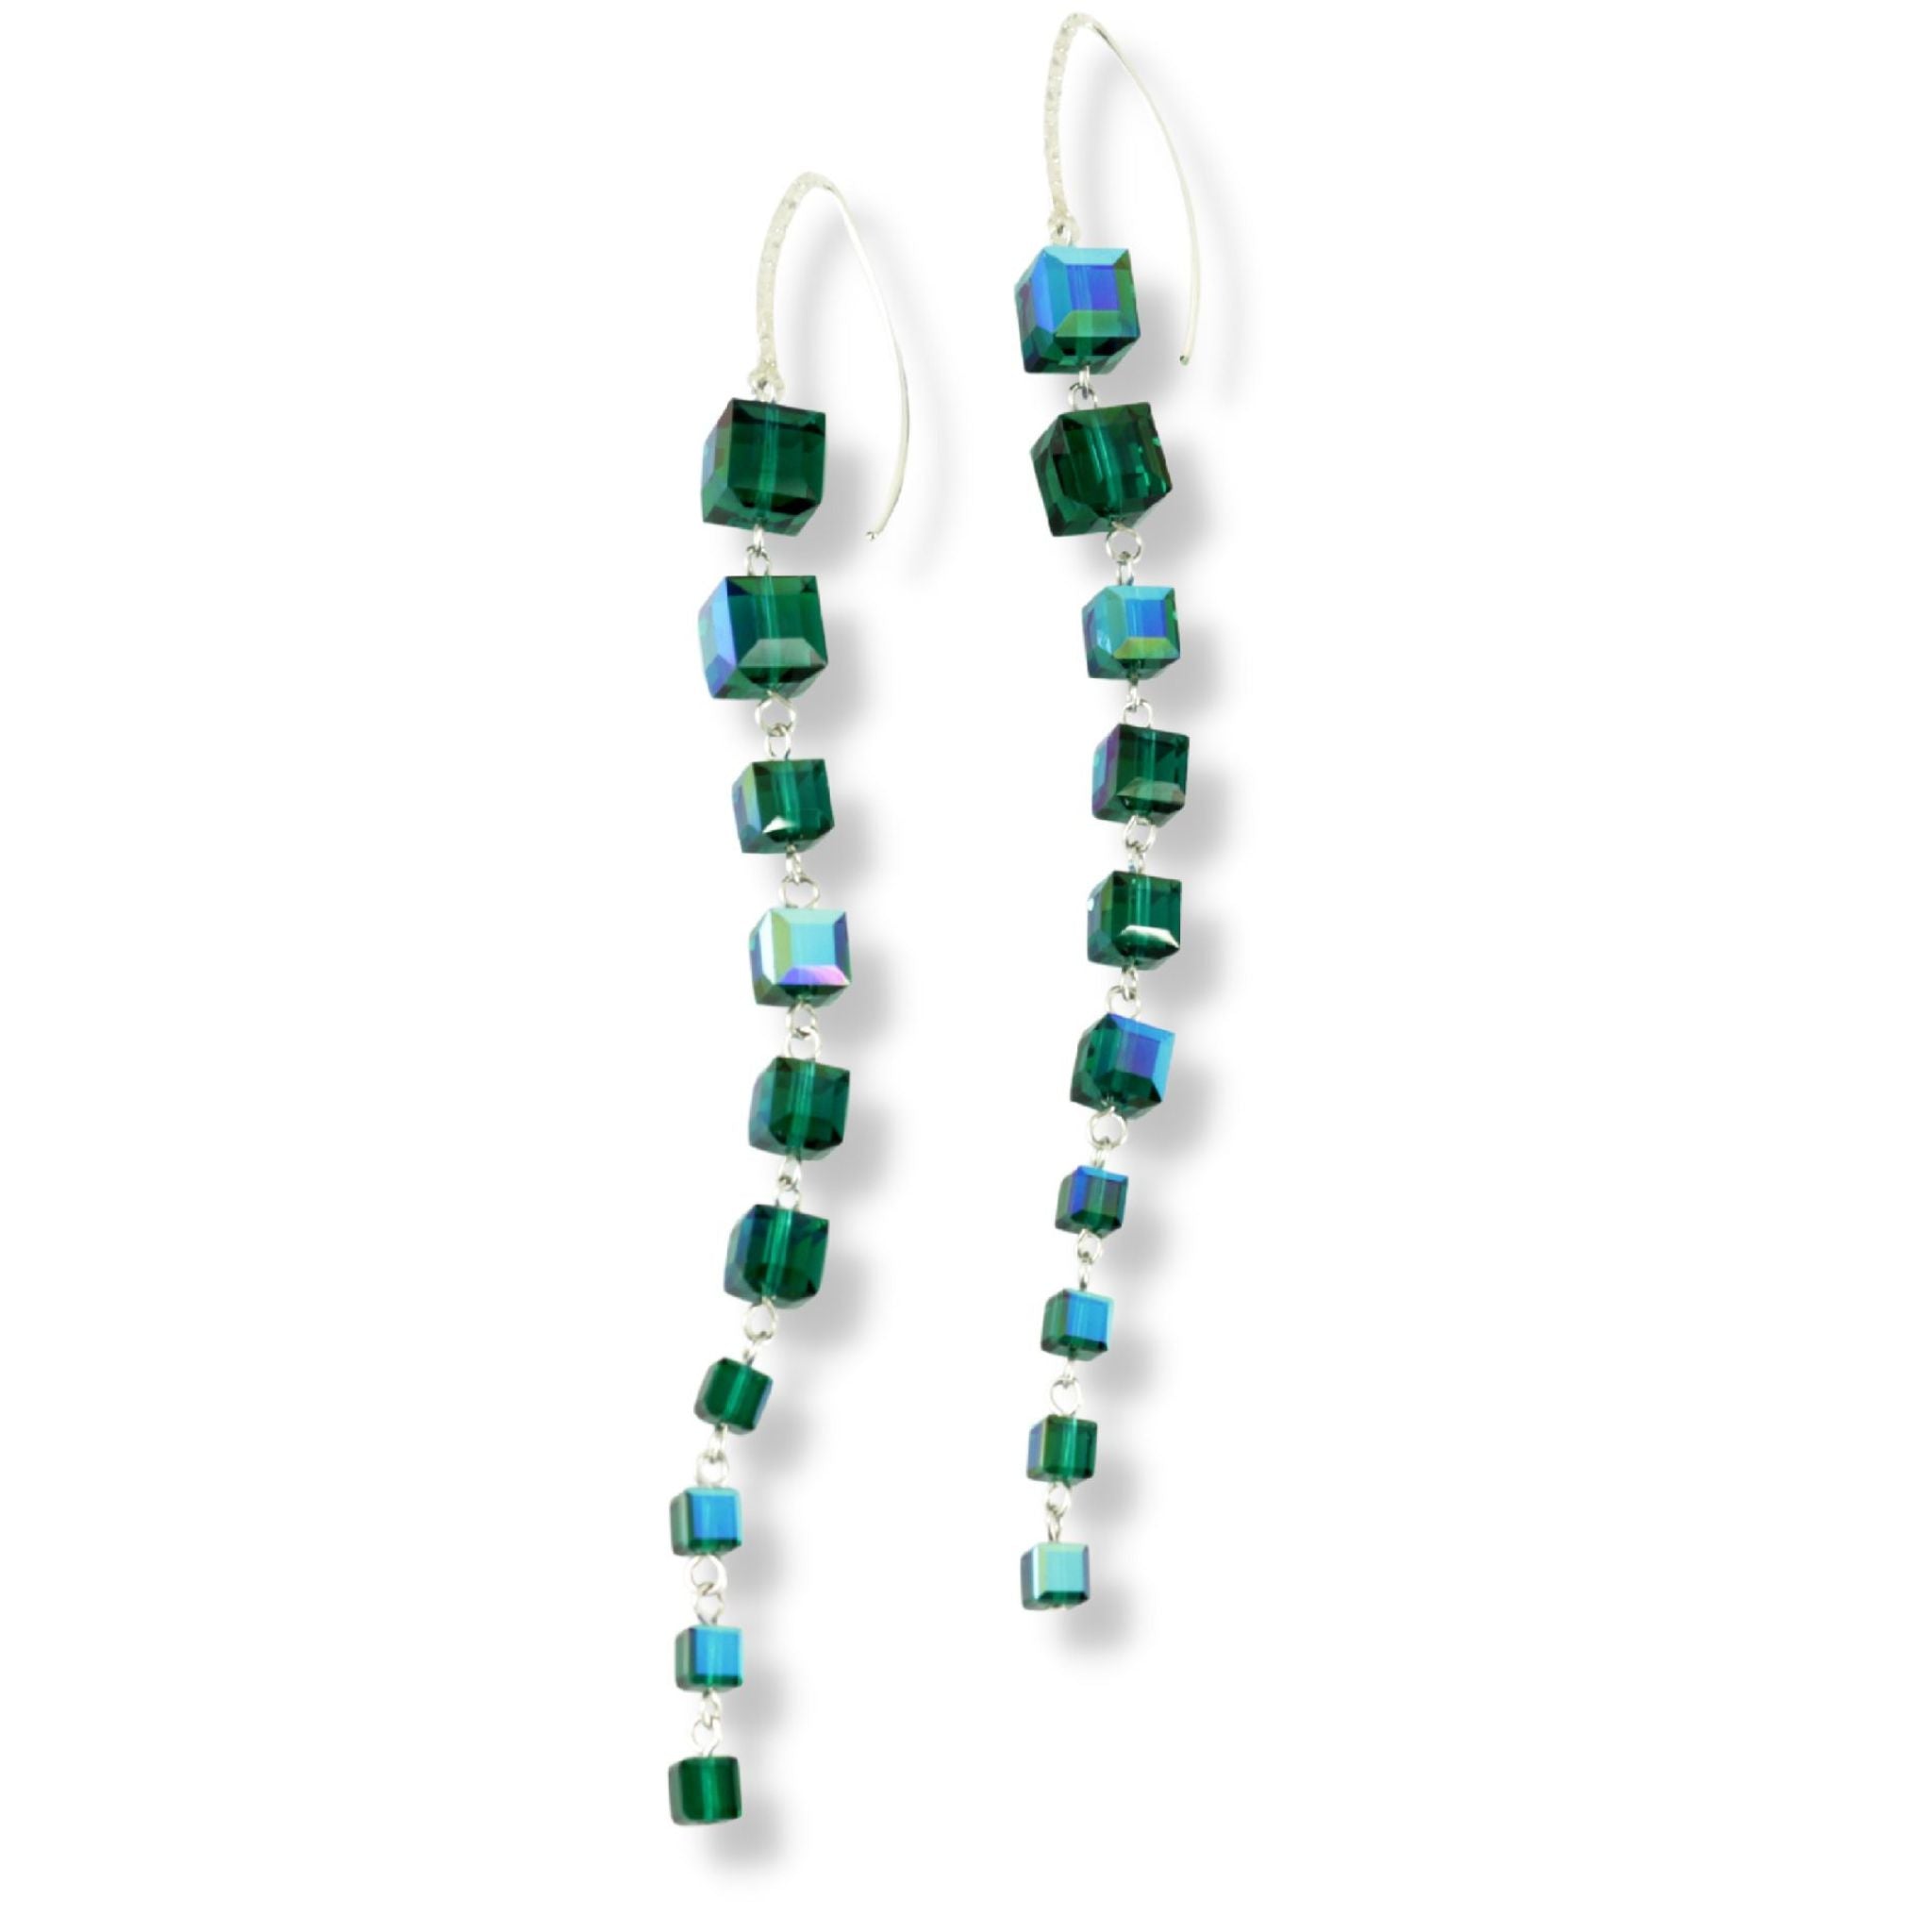 Extra long in length, these vibrant & sparkling emerald green cube shaped earrings are made with 10 Swarovski crystal earrings and connected with sterling silver